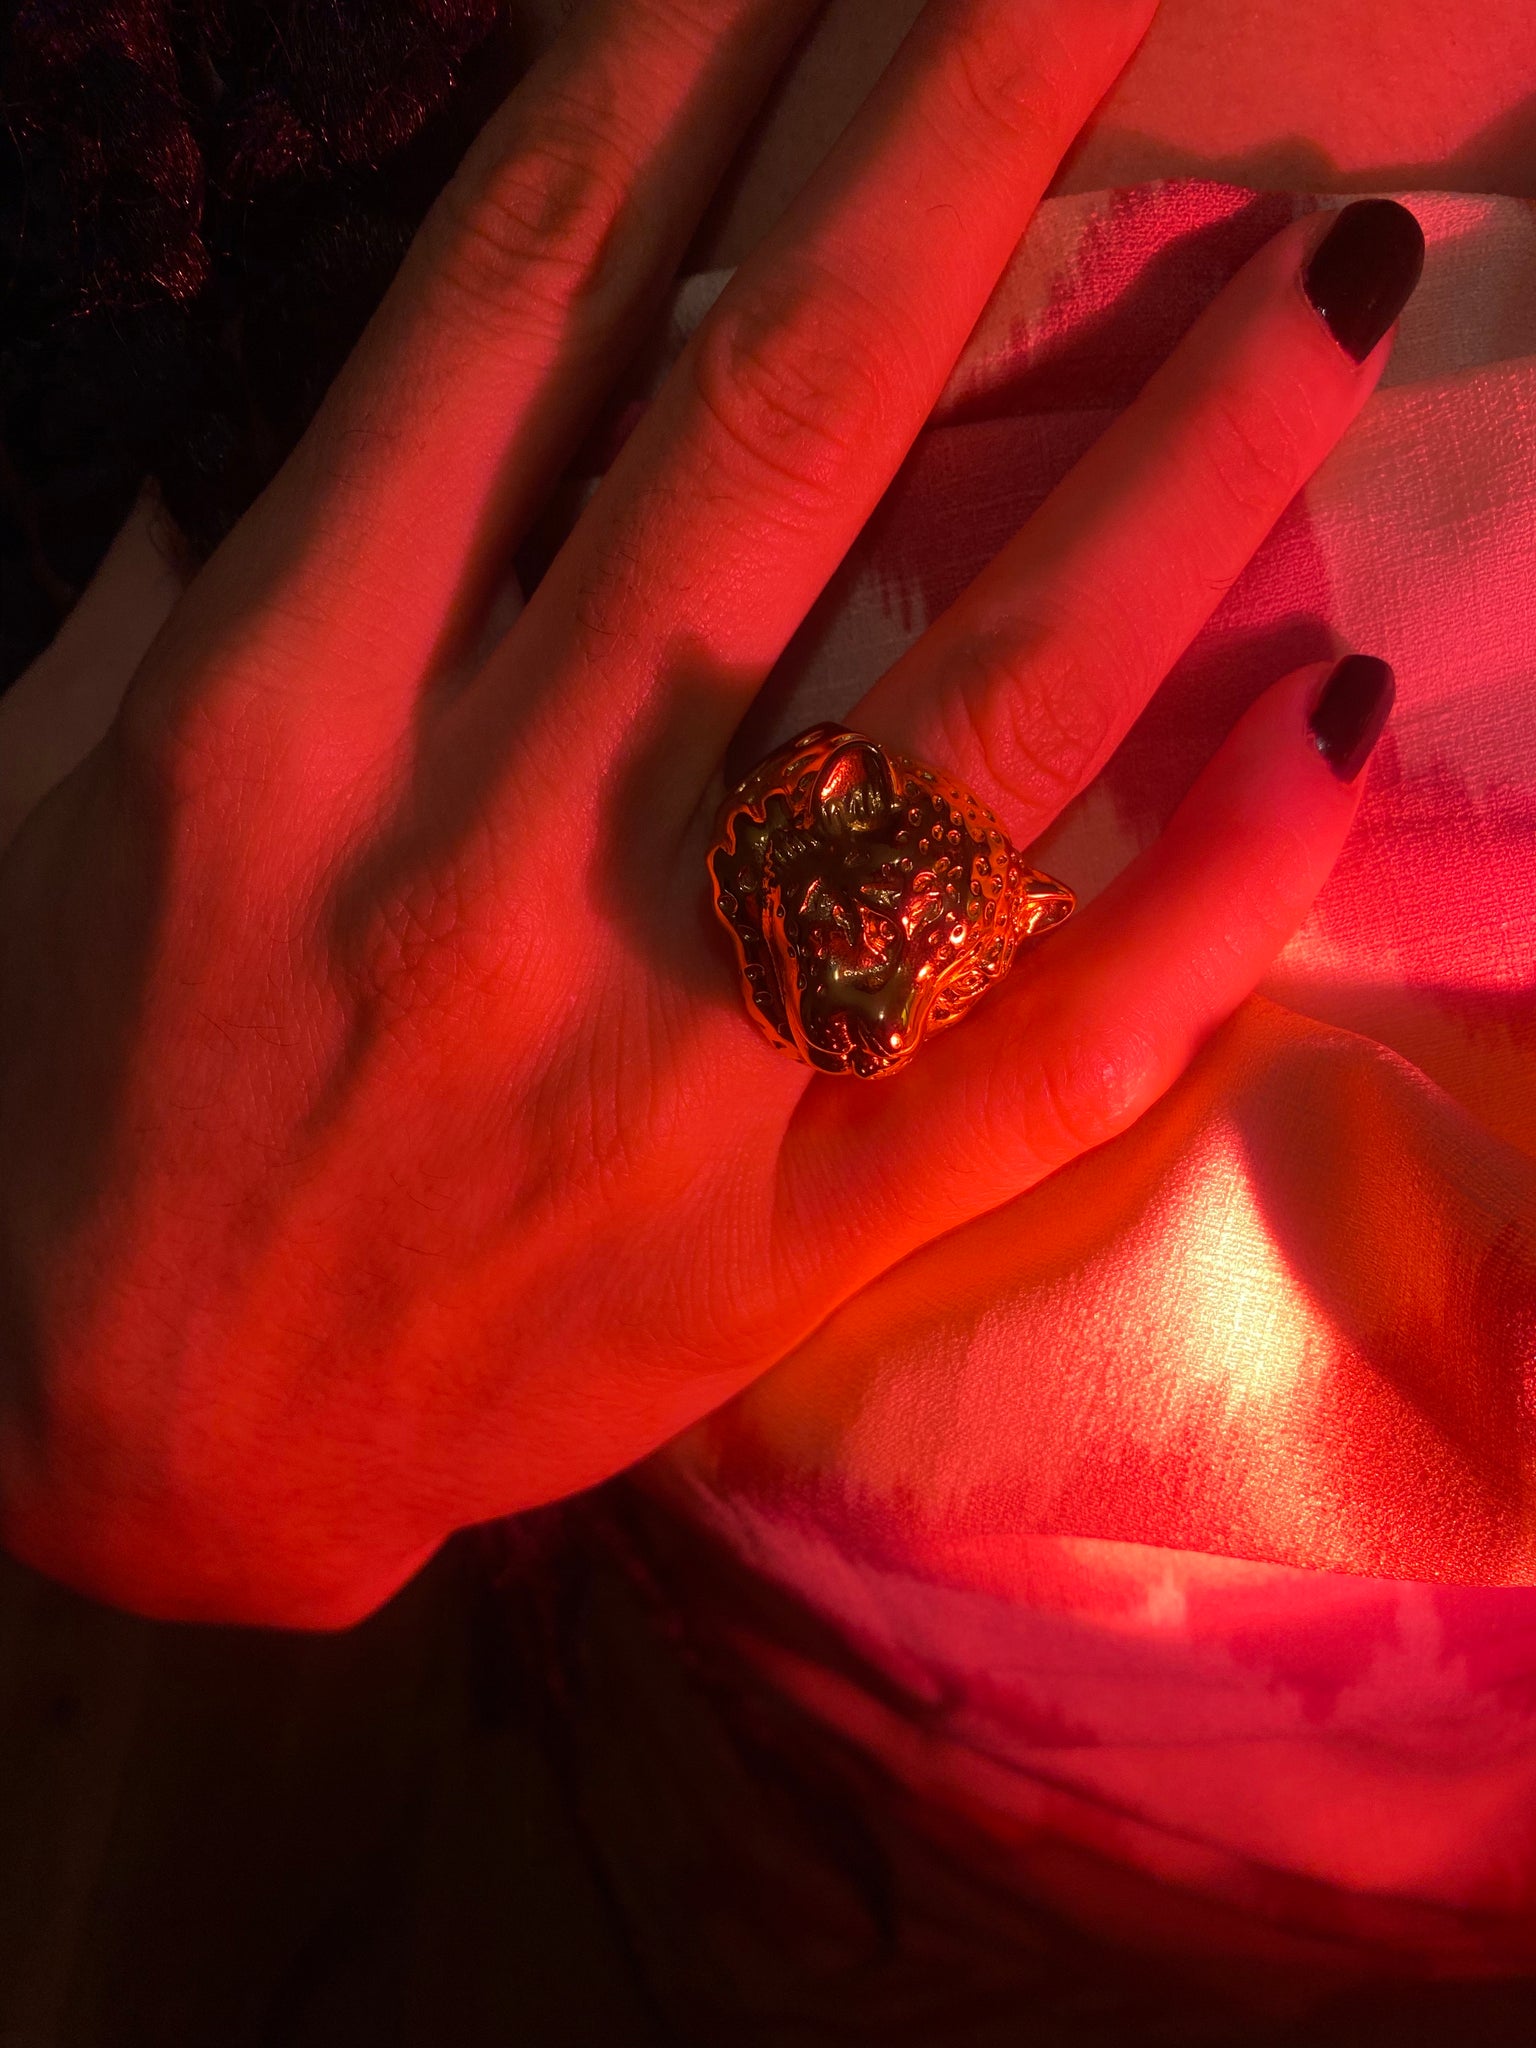 With moody red lighting a woman with painted nails wears a ring shaped as a snow leopard's head. 